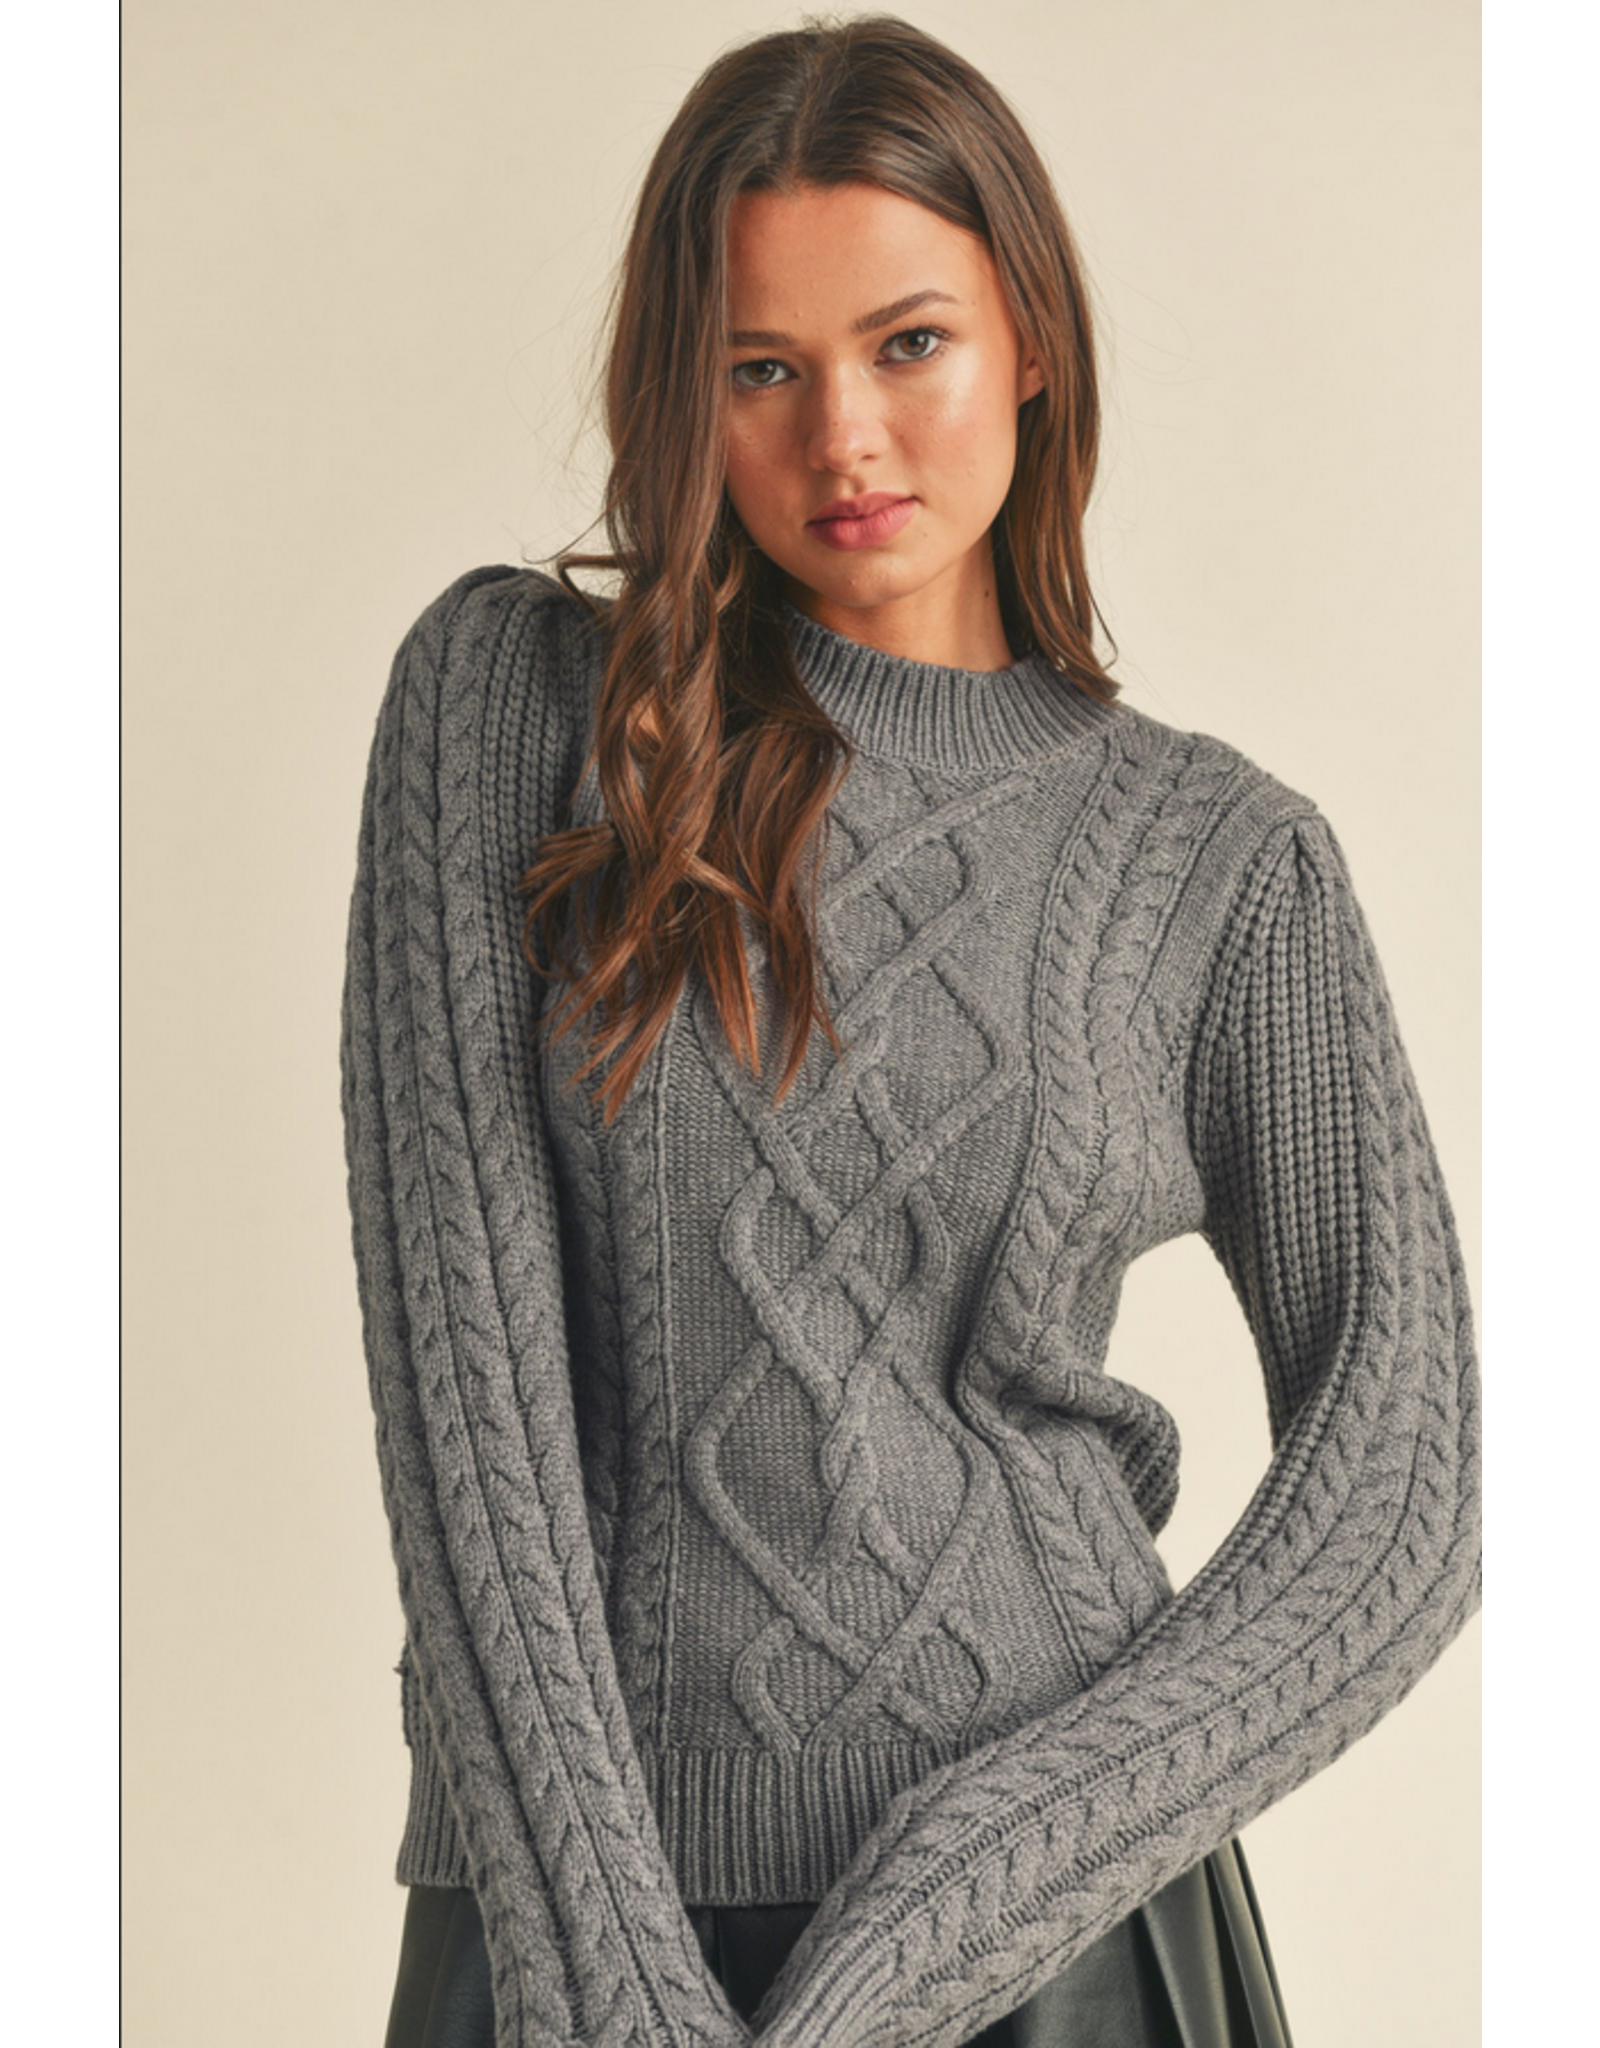 & Merci Mixed Cable Knit Sweater